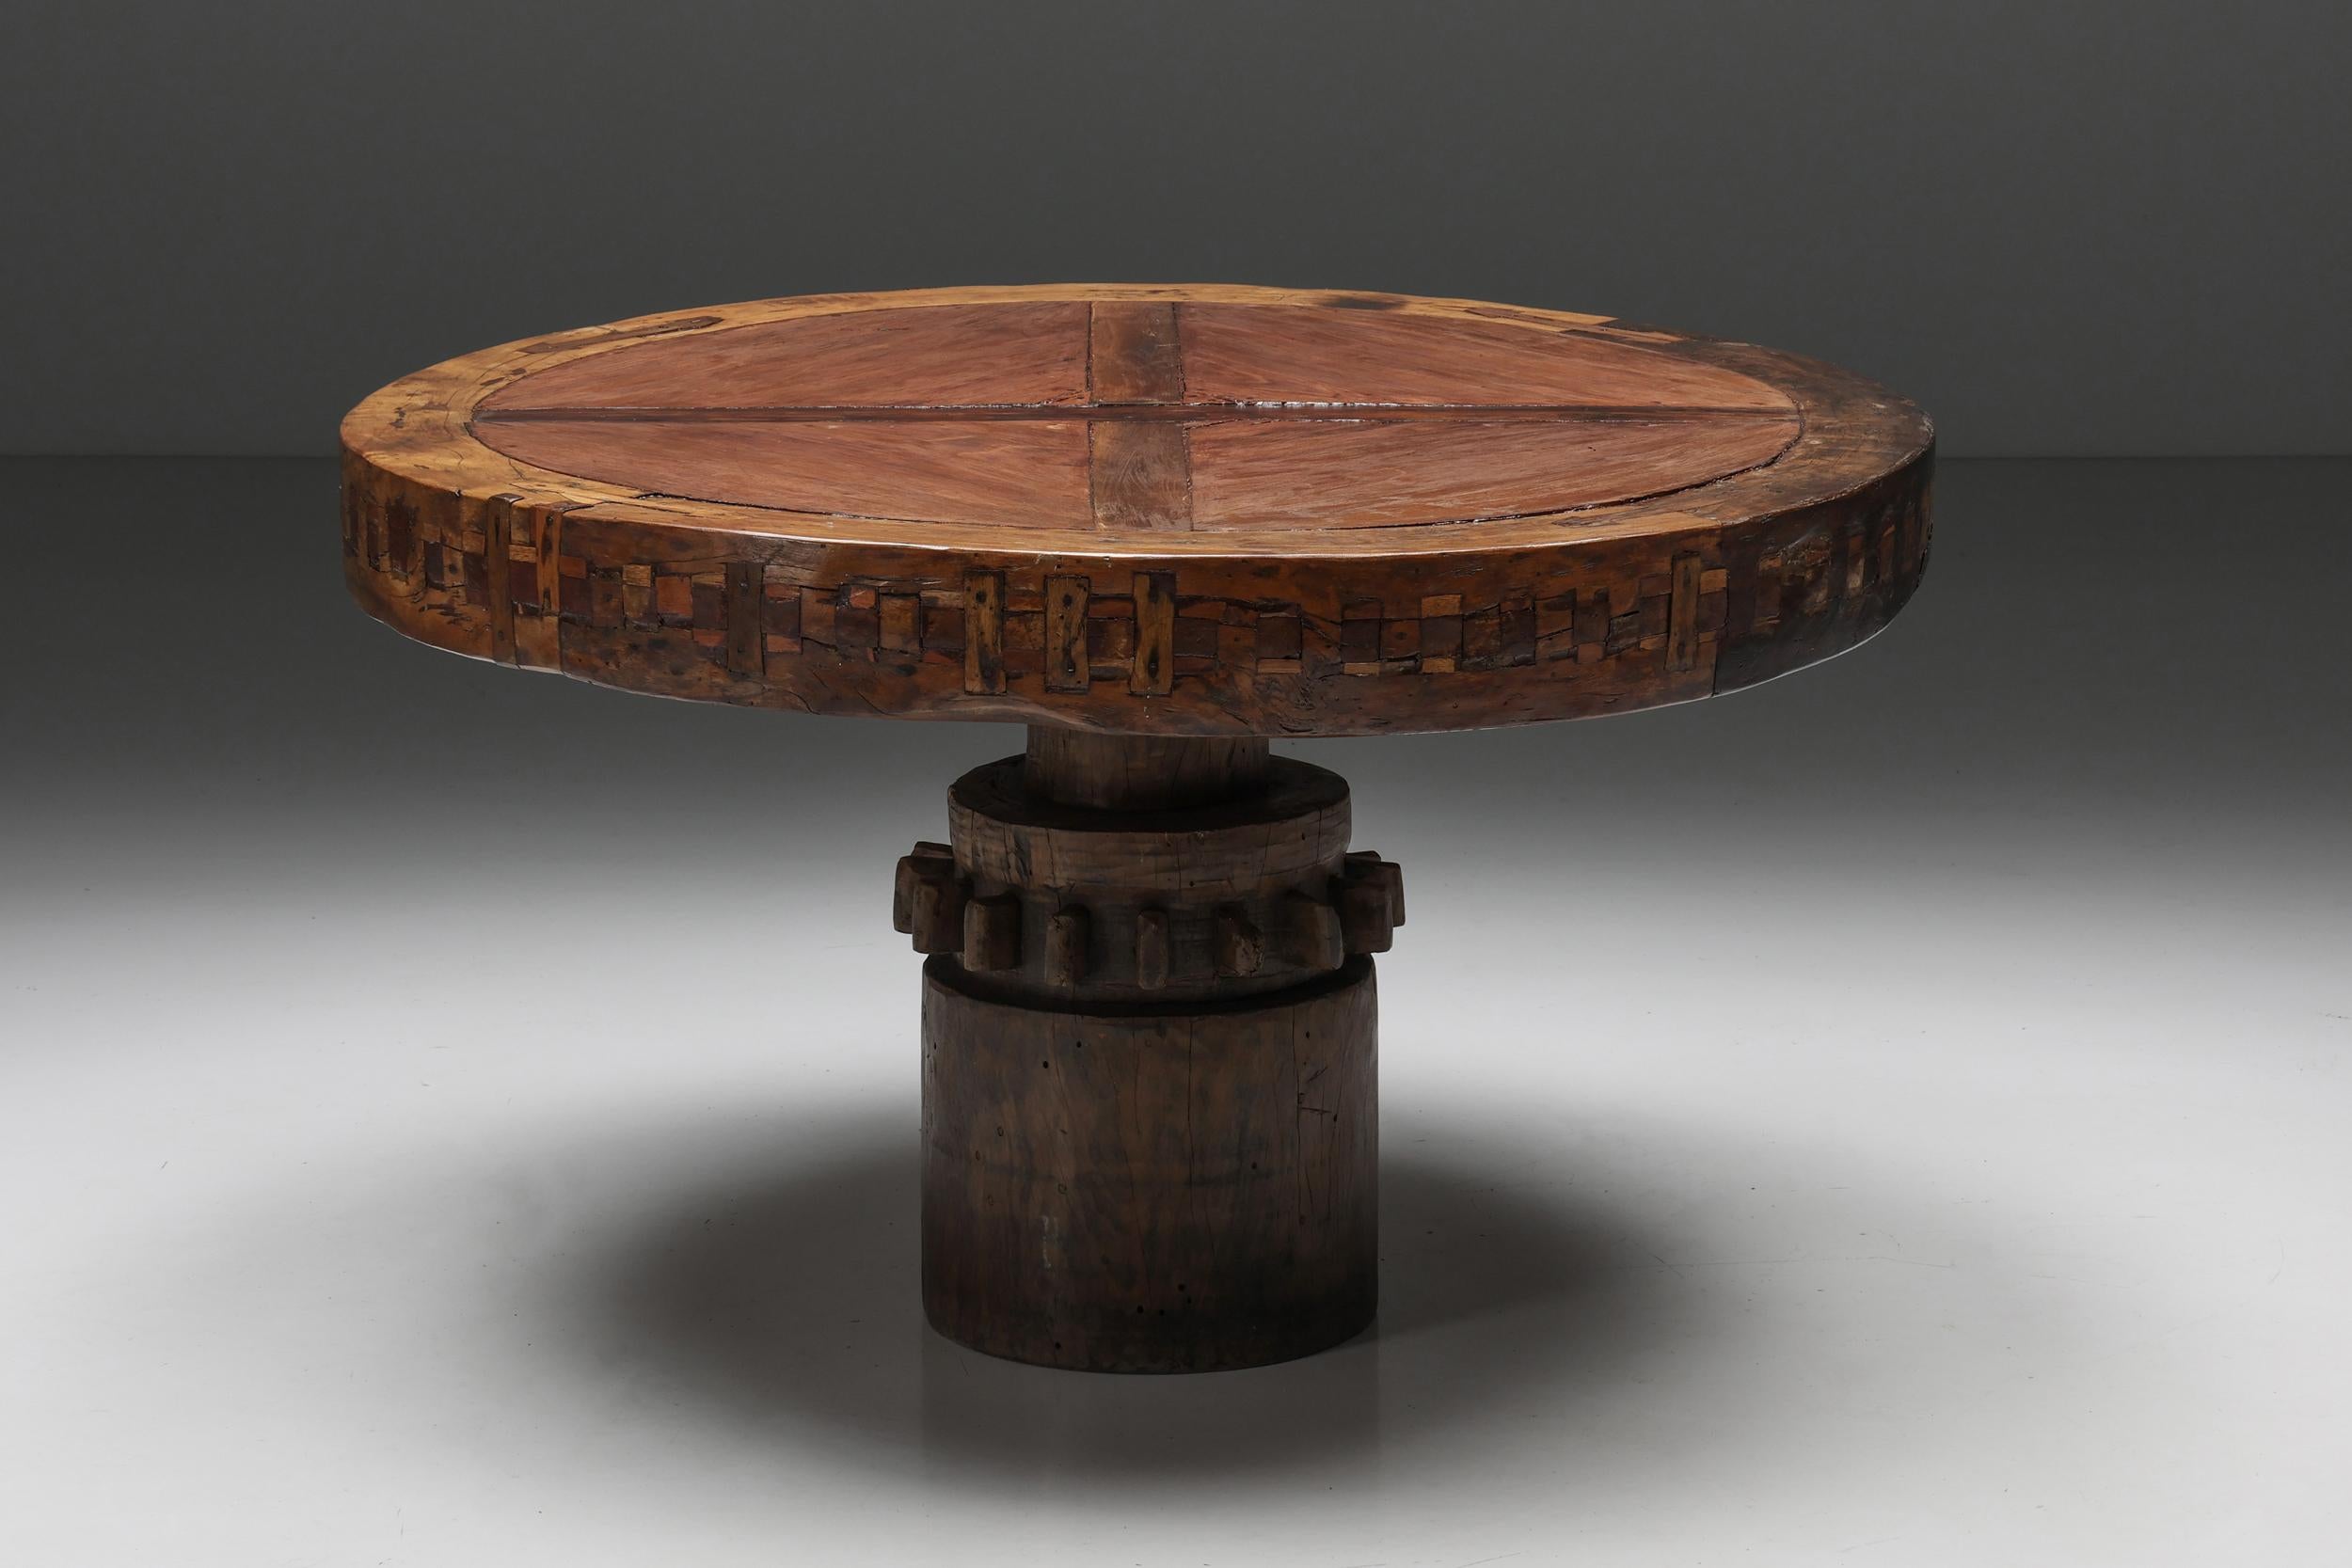 Round; geometric; wooden; dining table; 1950s.

A rare round dining table made of solid wood in a geometric pattern. This robust mid-century modern dining table features a seemingly floating tabletop, resting on a central sturdy base. This